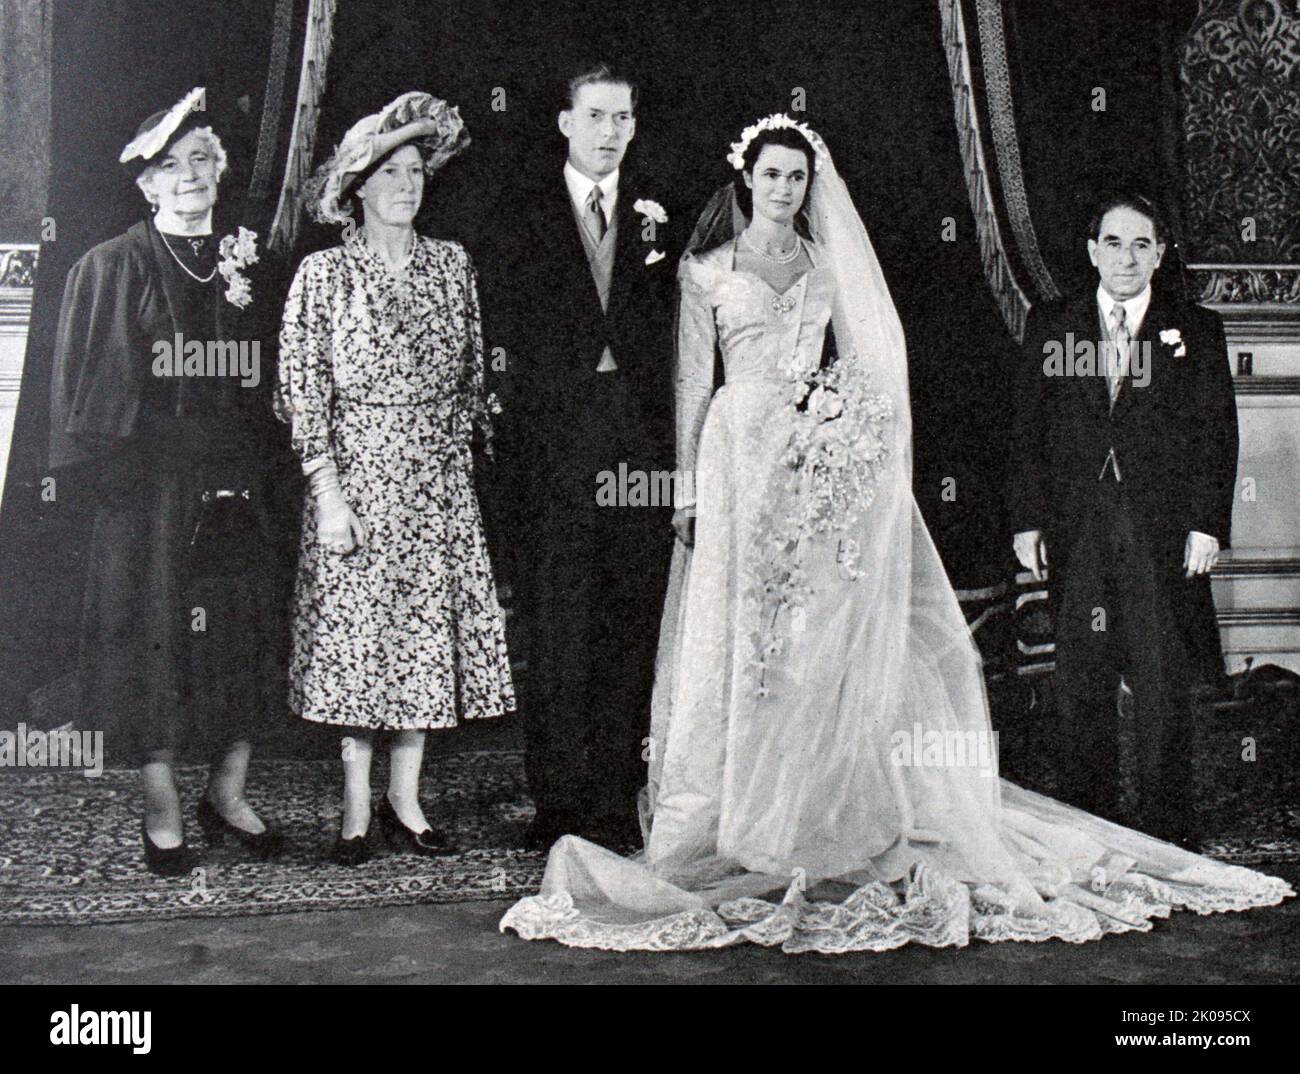 Wedding of Lord Harewood married Marion Stein. On 29 September 1949 at St. Mark's Church, London, Lord Harewood married Marion Stein, a concert pianist and the daughter of the Viennese music publisher Erwin Stein. George Henry Hubert Lascelles, 7th Earl of Harewood, KBE, AM (7 February 1923 - 11 July 2011), styled The Honourable George Lascelles before 1929 and Viscount Lascelles between 1929 and 1947, was a British classical music administrator and author. Illustrated London News. Stock Photo